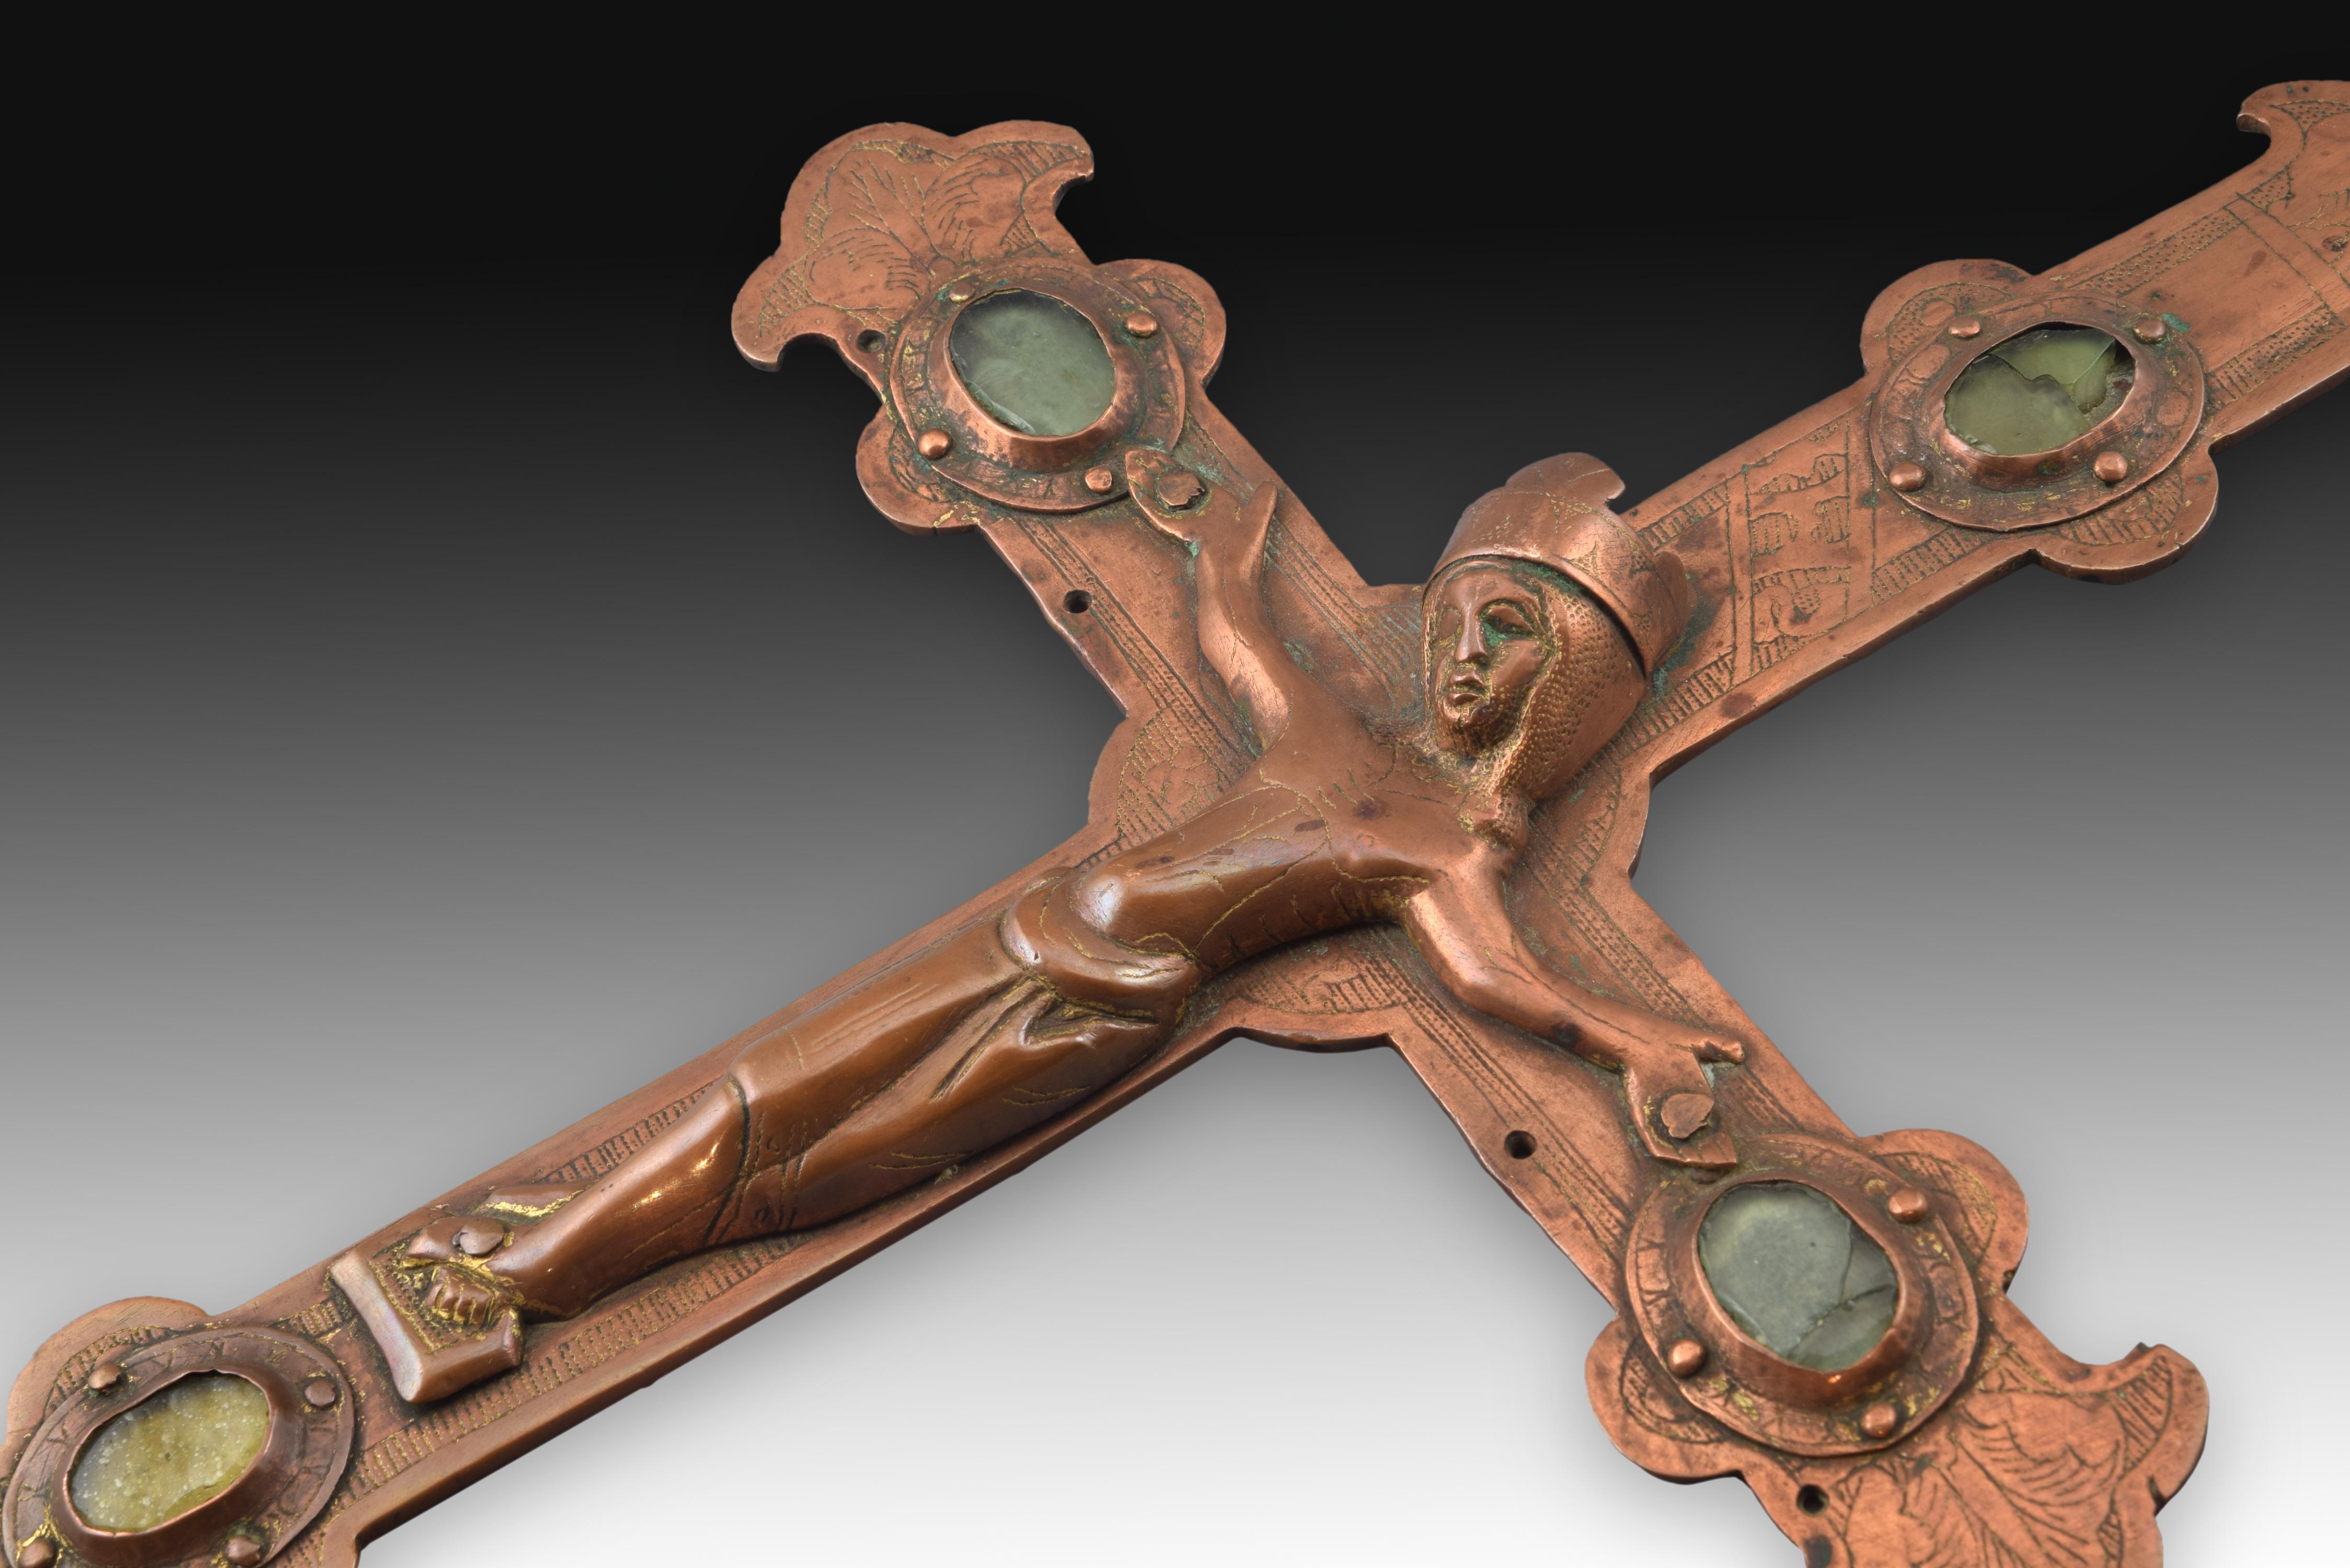 European Processional Cross with Christ Copper, 14th Century